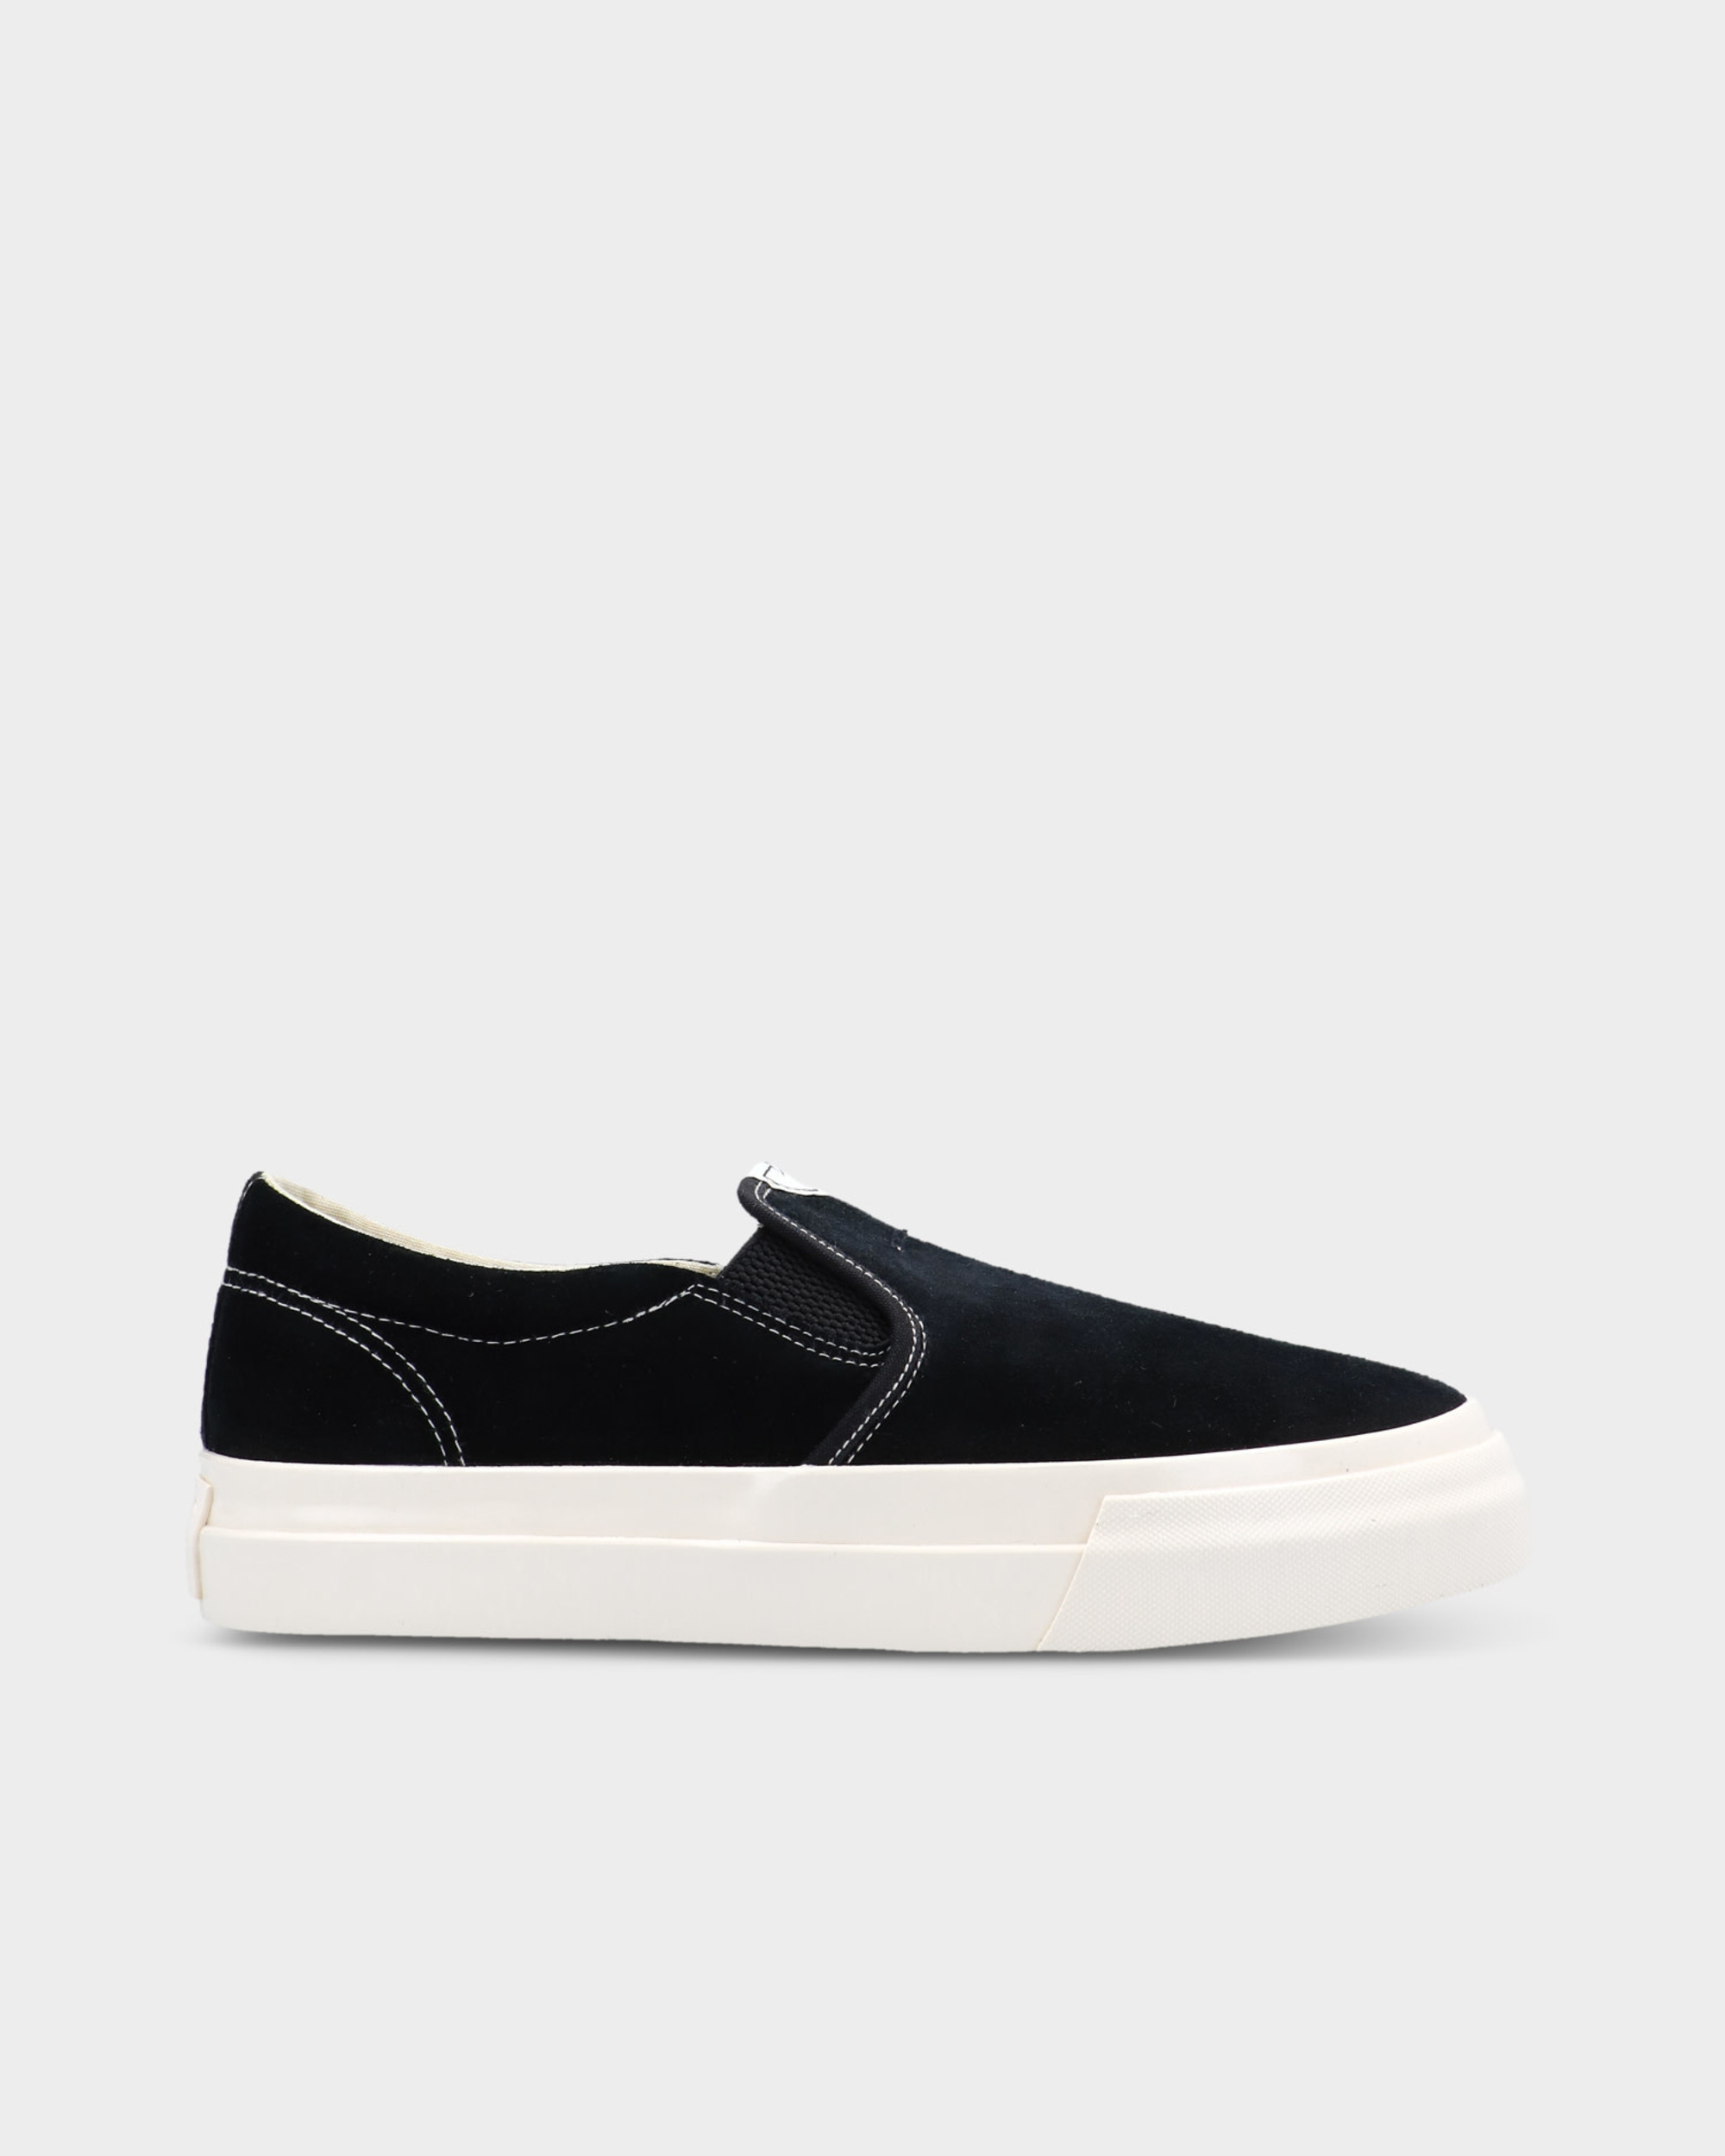 Stepney Workers Club Lister L Suede Black